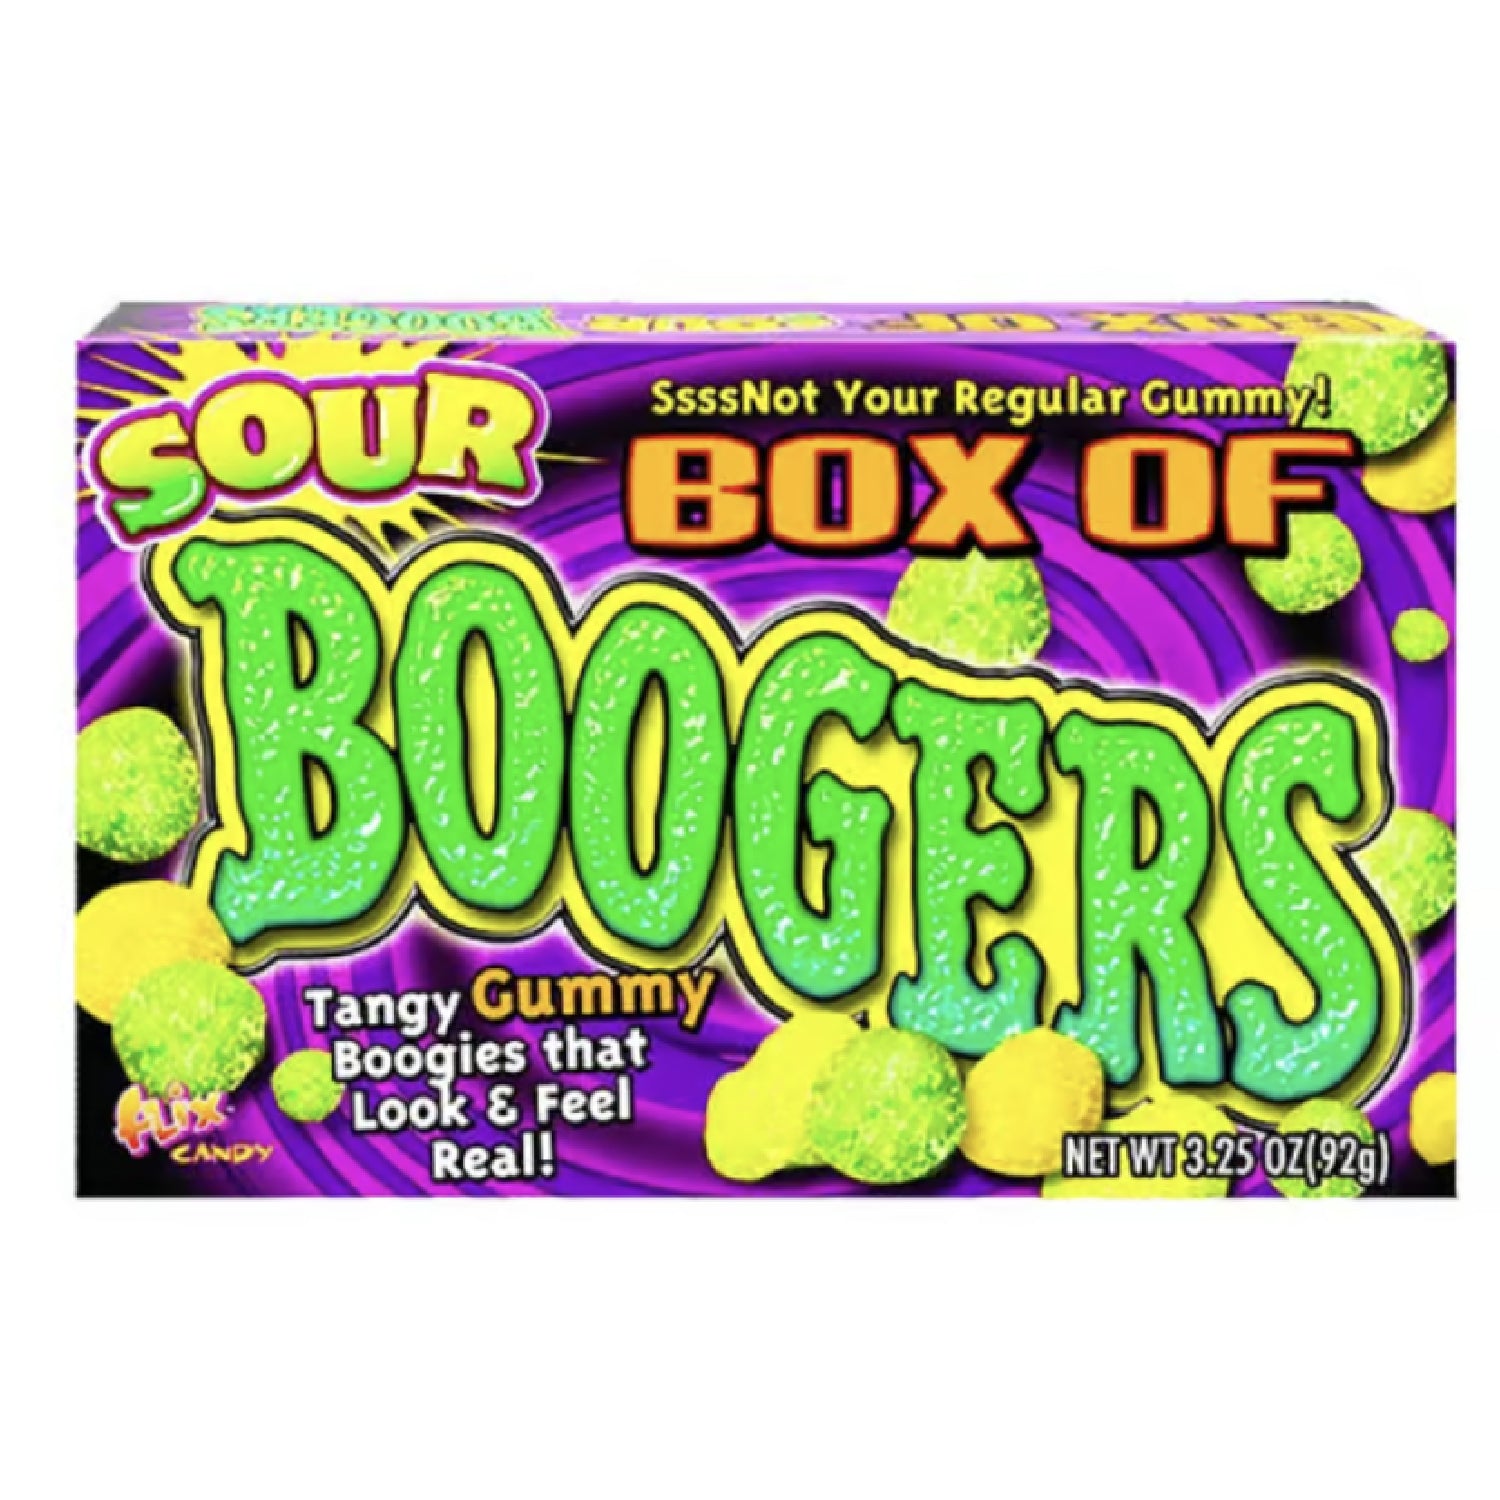 Box of Sour Boogers